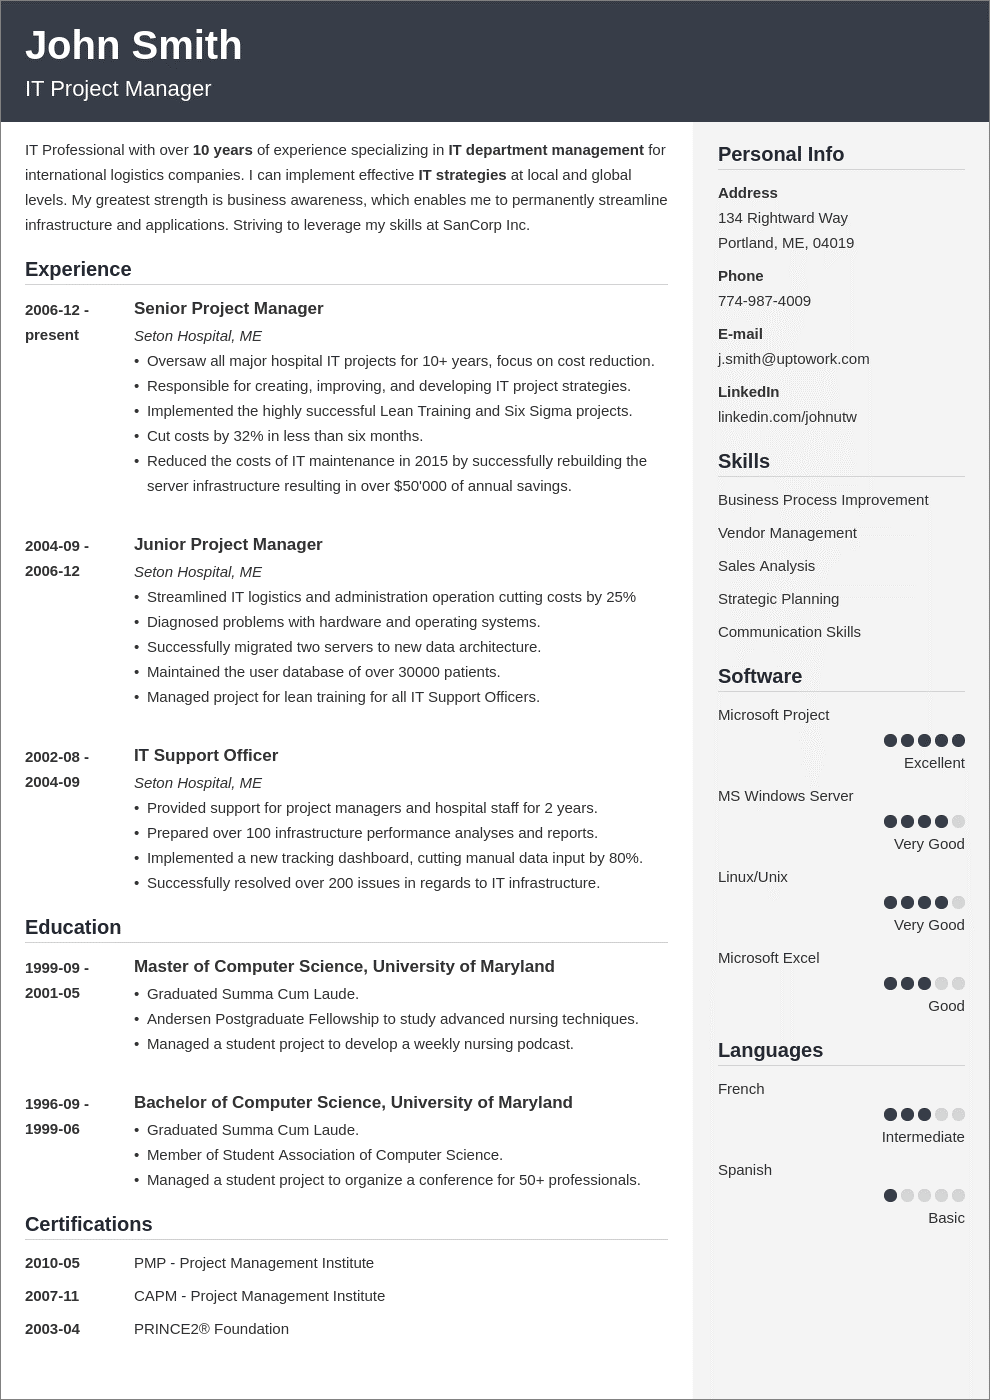 one-page CV style